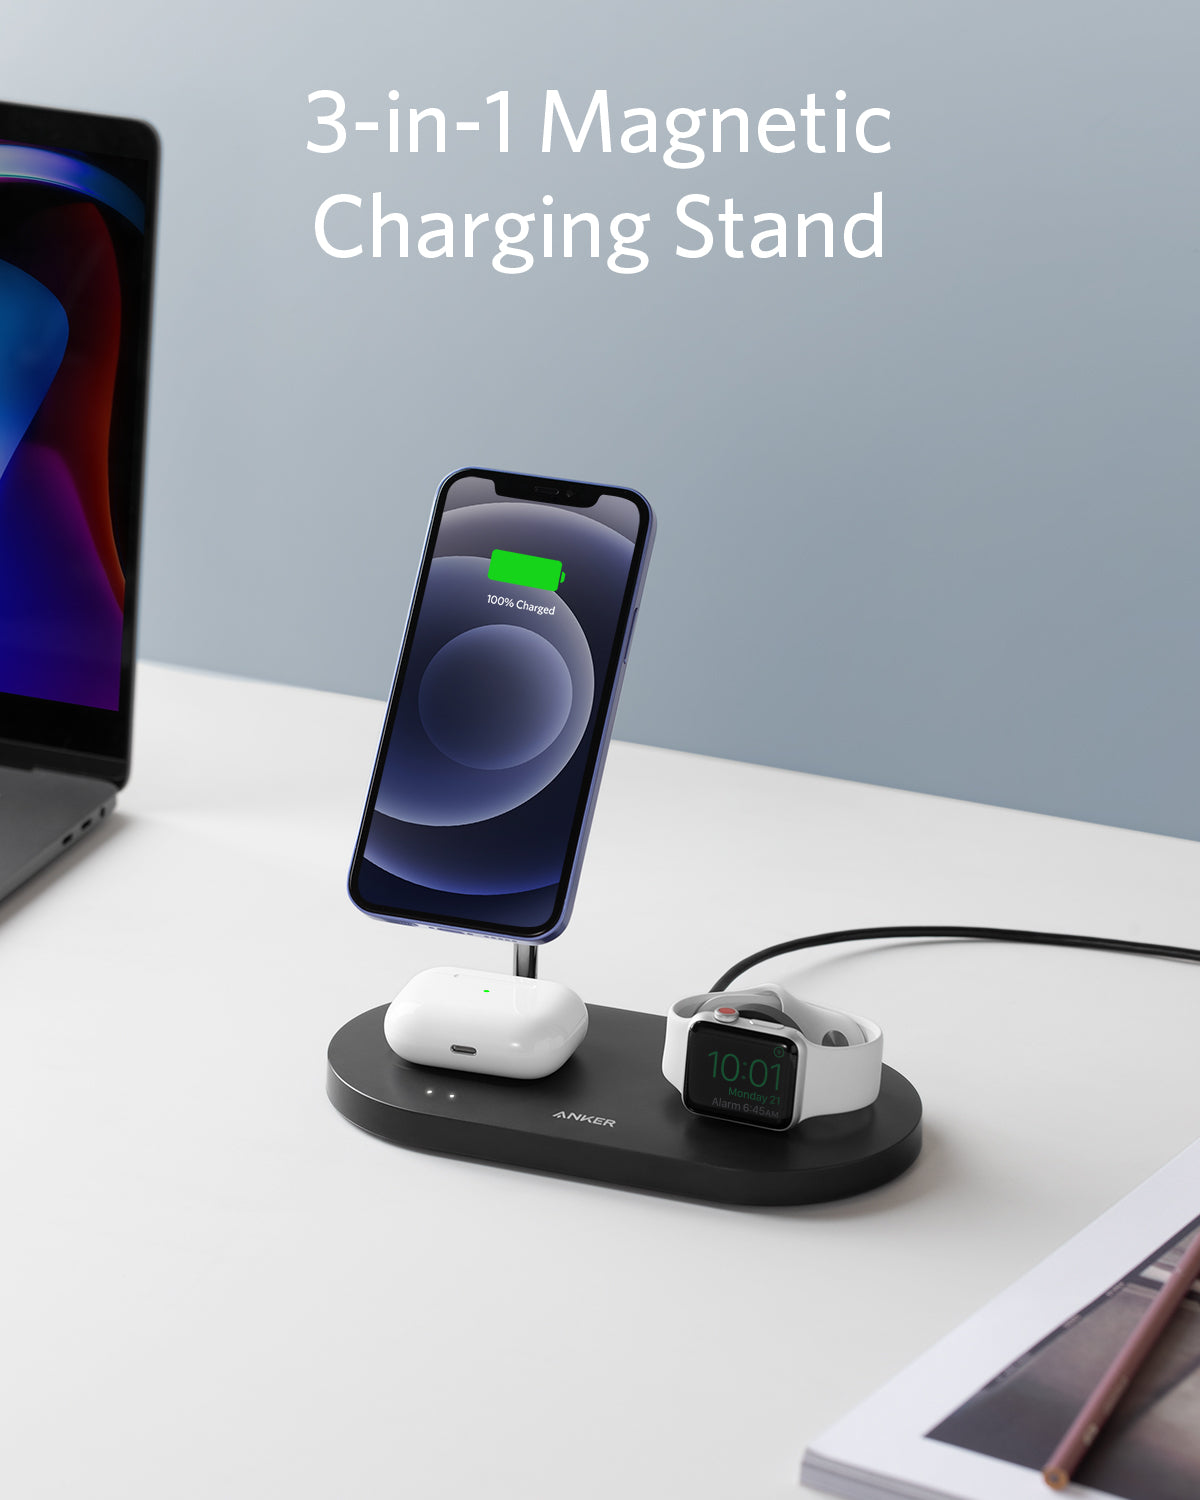 ironi søskende Gods Anker 533 Magnetic Wireless Charger (3-in-1 Stand) - Anker US